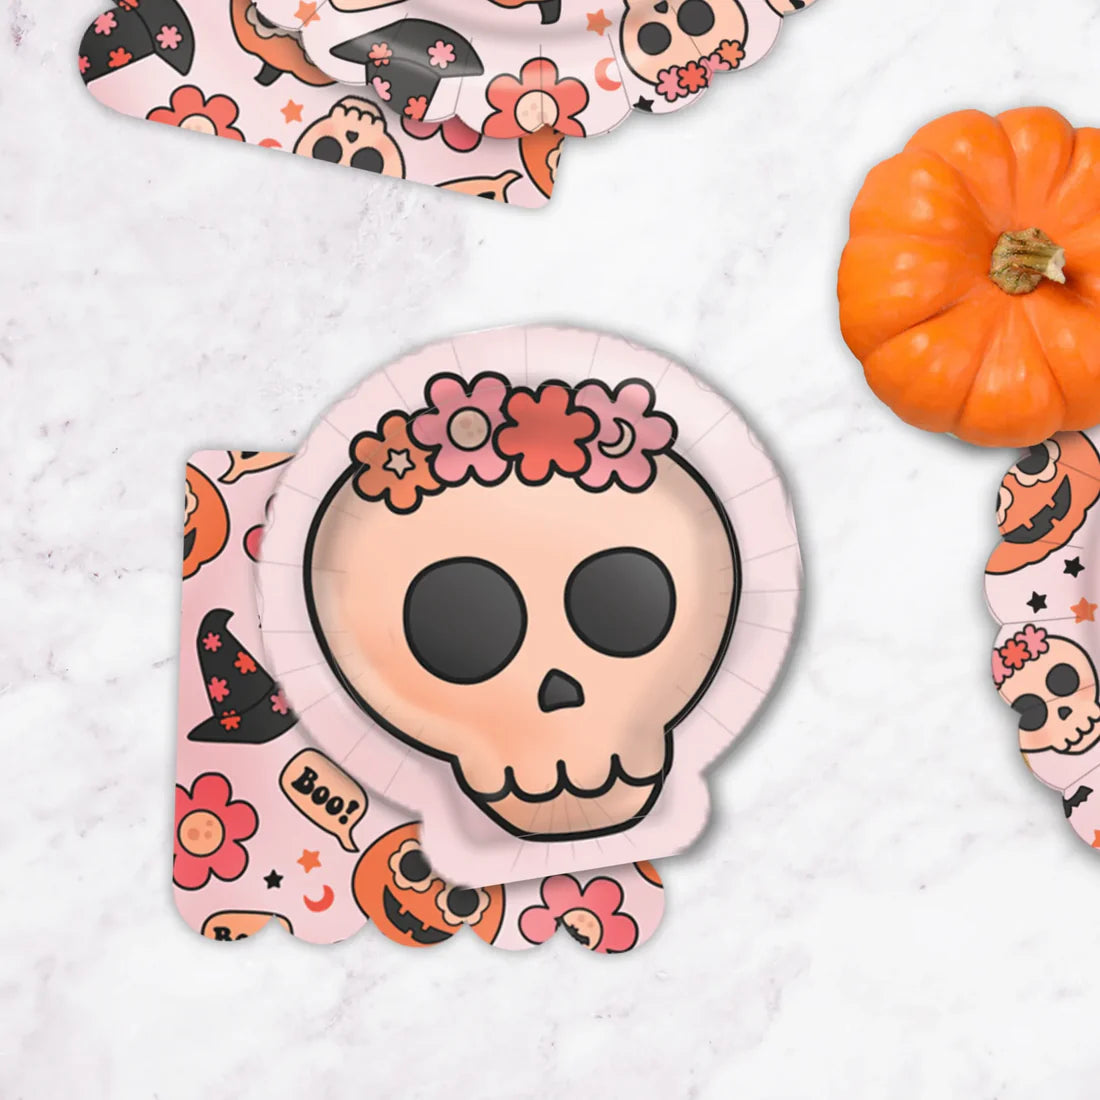 Groovy Skull Paper Plate, Halloween Decorations, Halloween Party